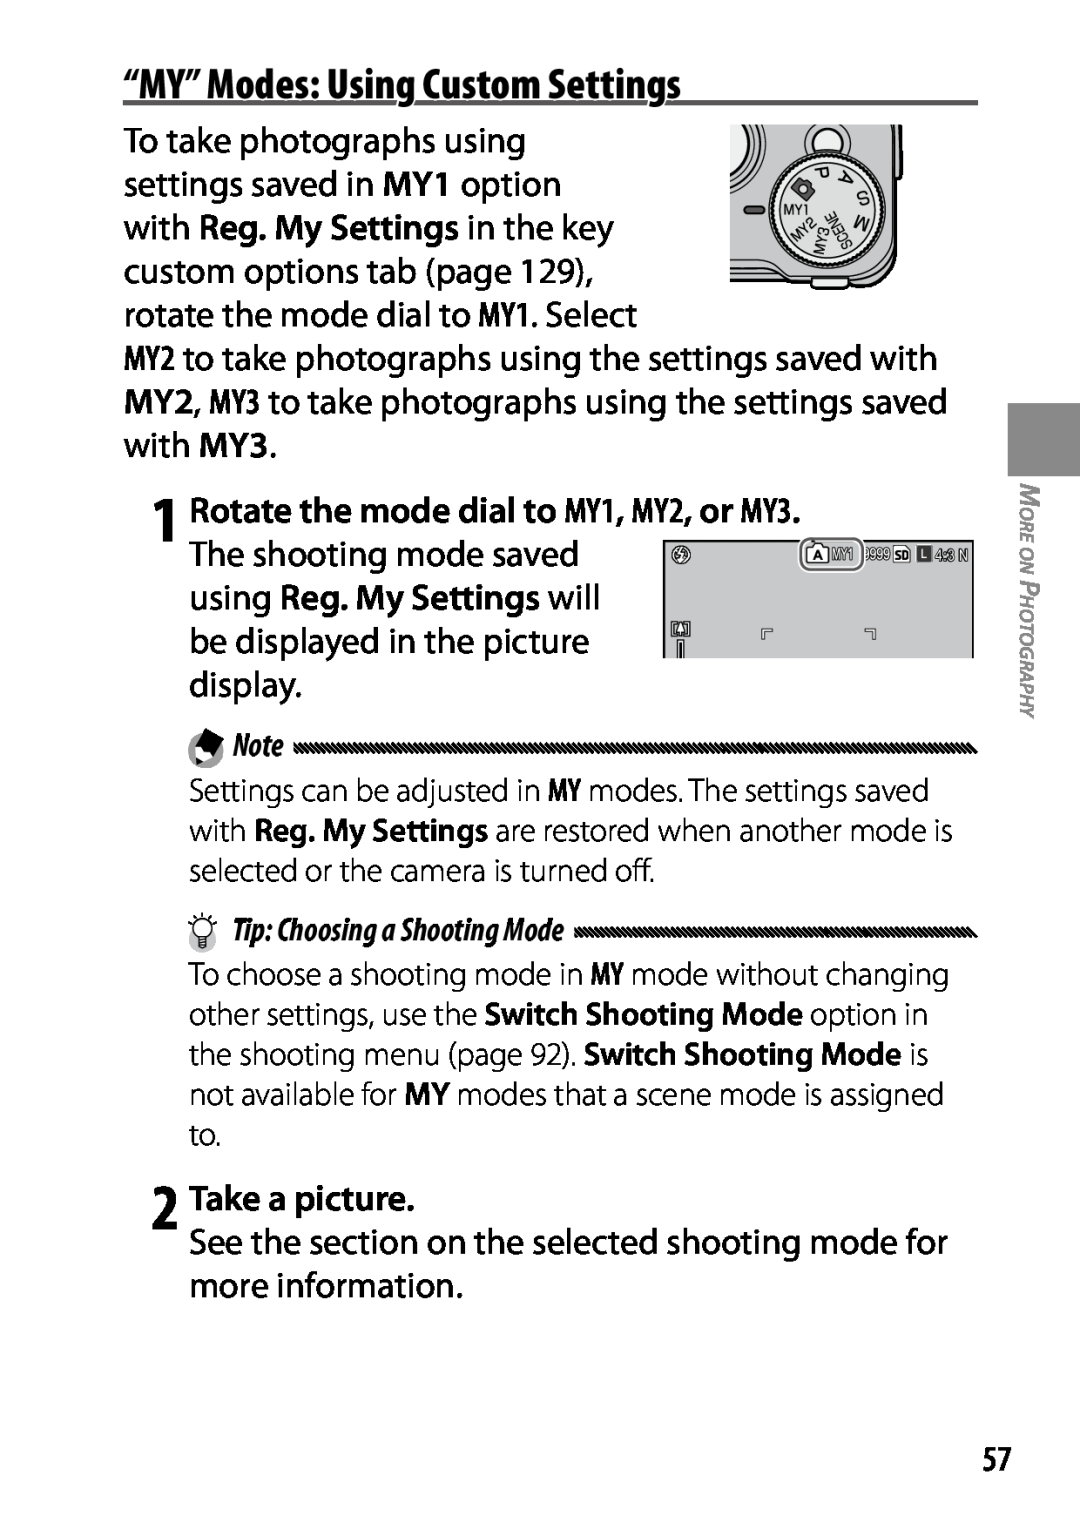 Ricoh GXR manual “MY” Modes Using Custom Settings, 1 Rotate the mode dial to MY1, MY2, or MY3, using Reg. My Settings will 